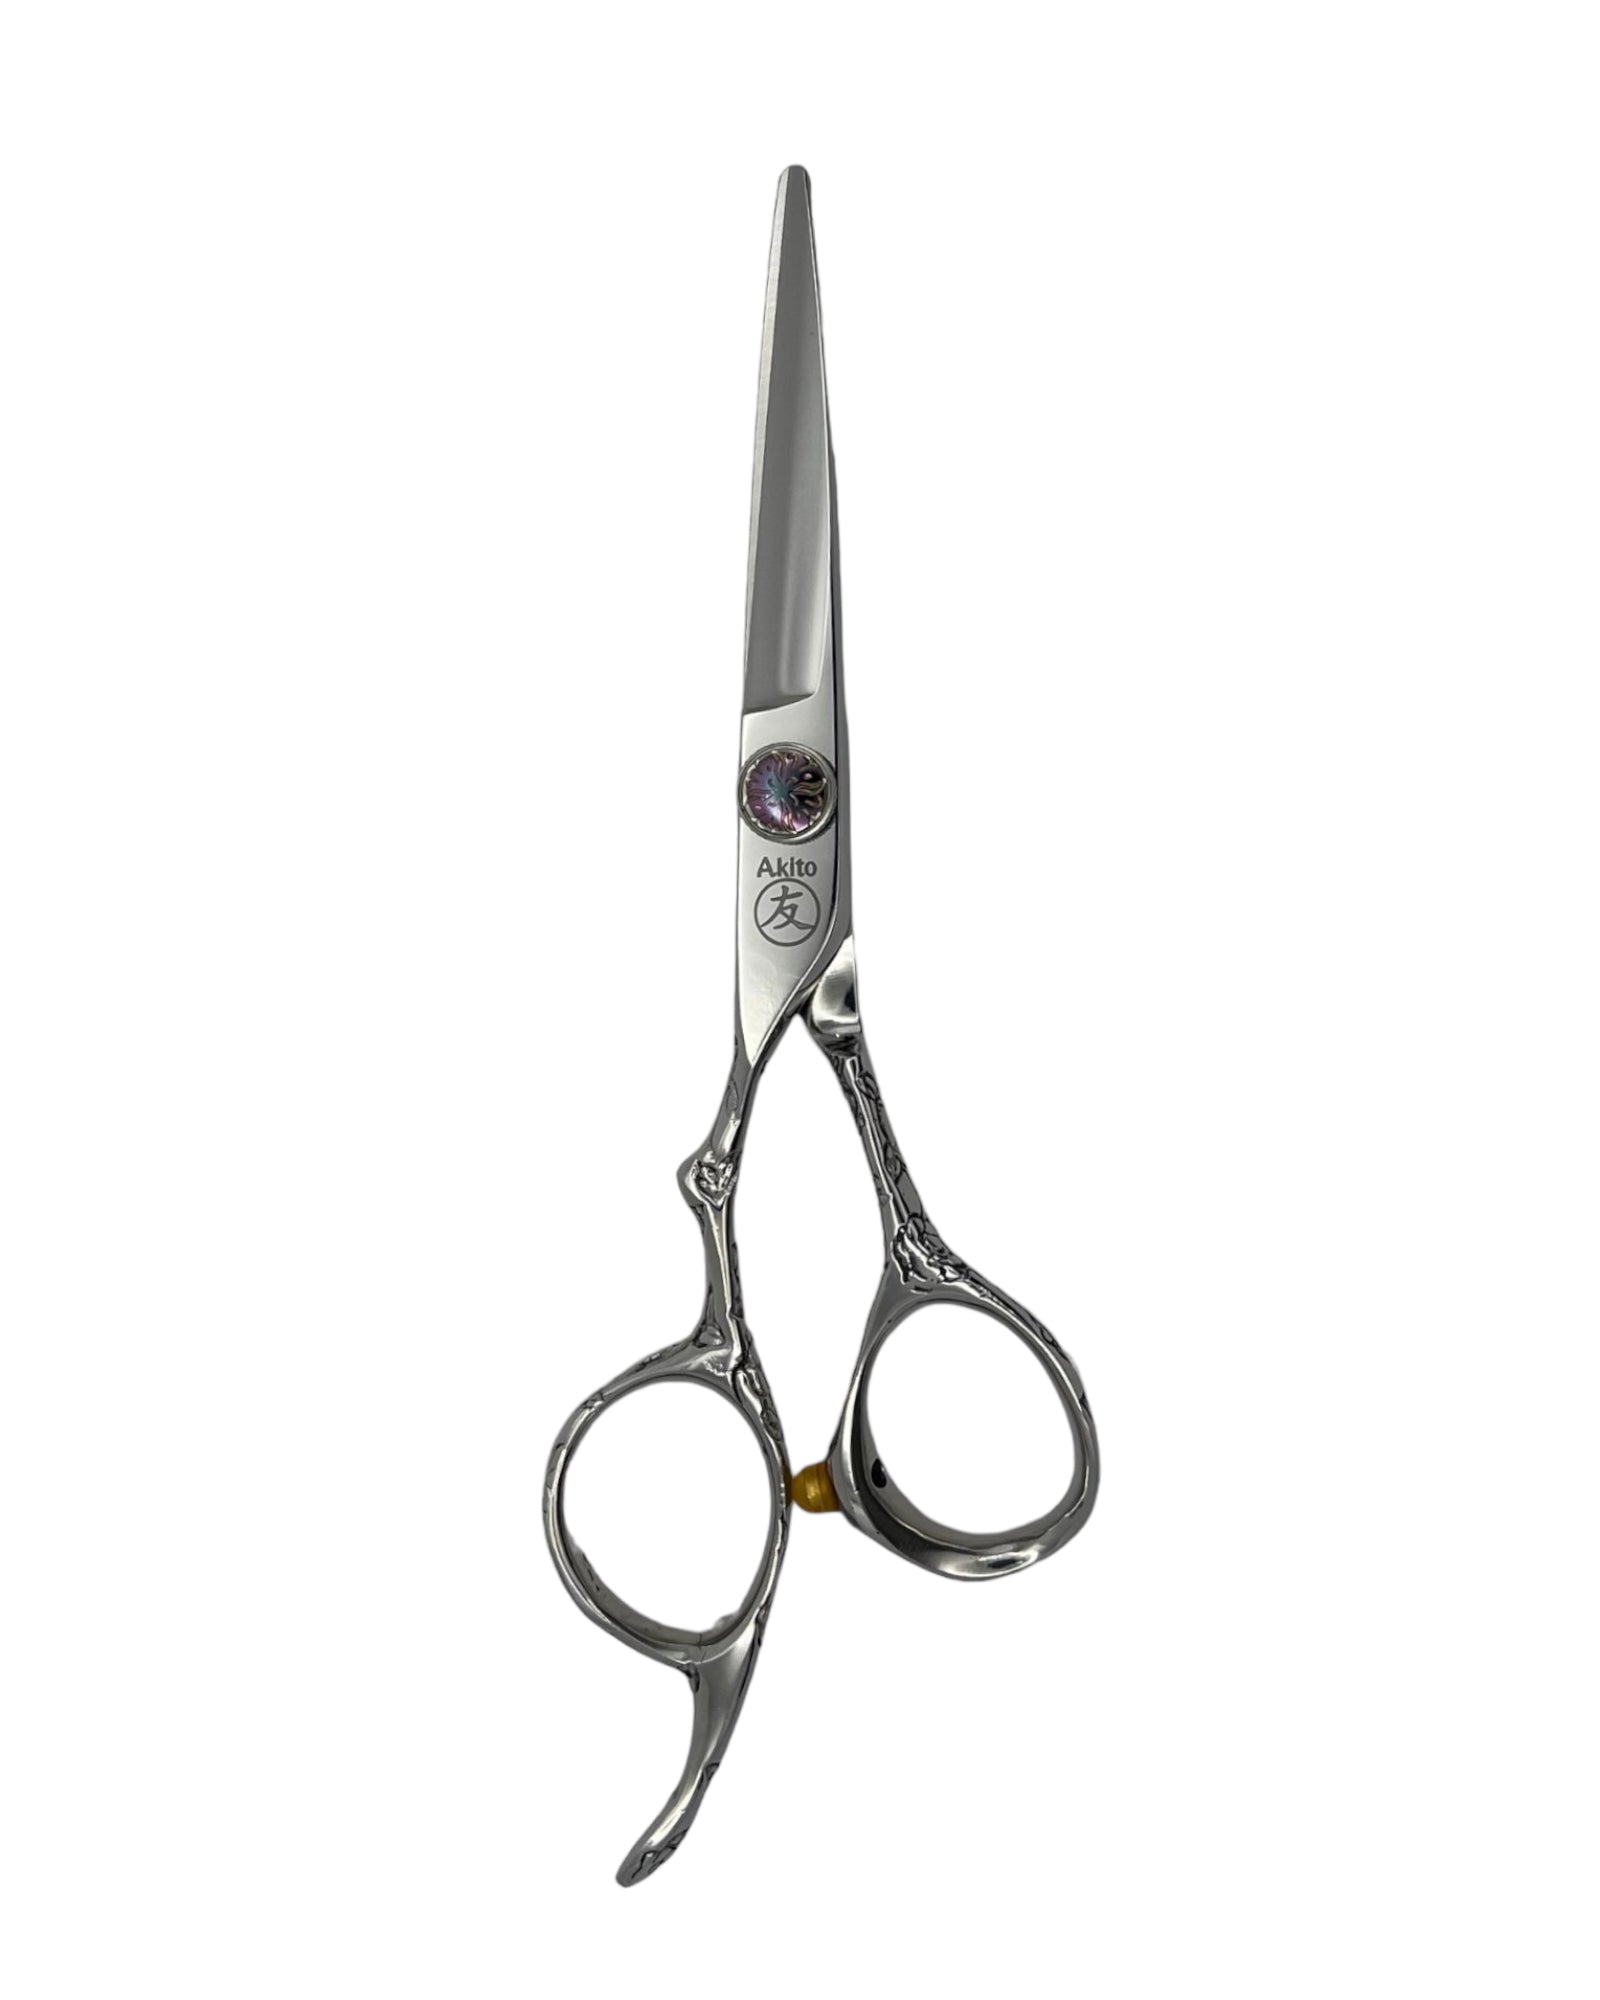 Etaro LCR-55 Left Handed Scissors - 5.5 Inches, Left-Handed Shears, Hair  Cutting Shears